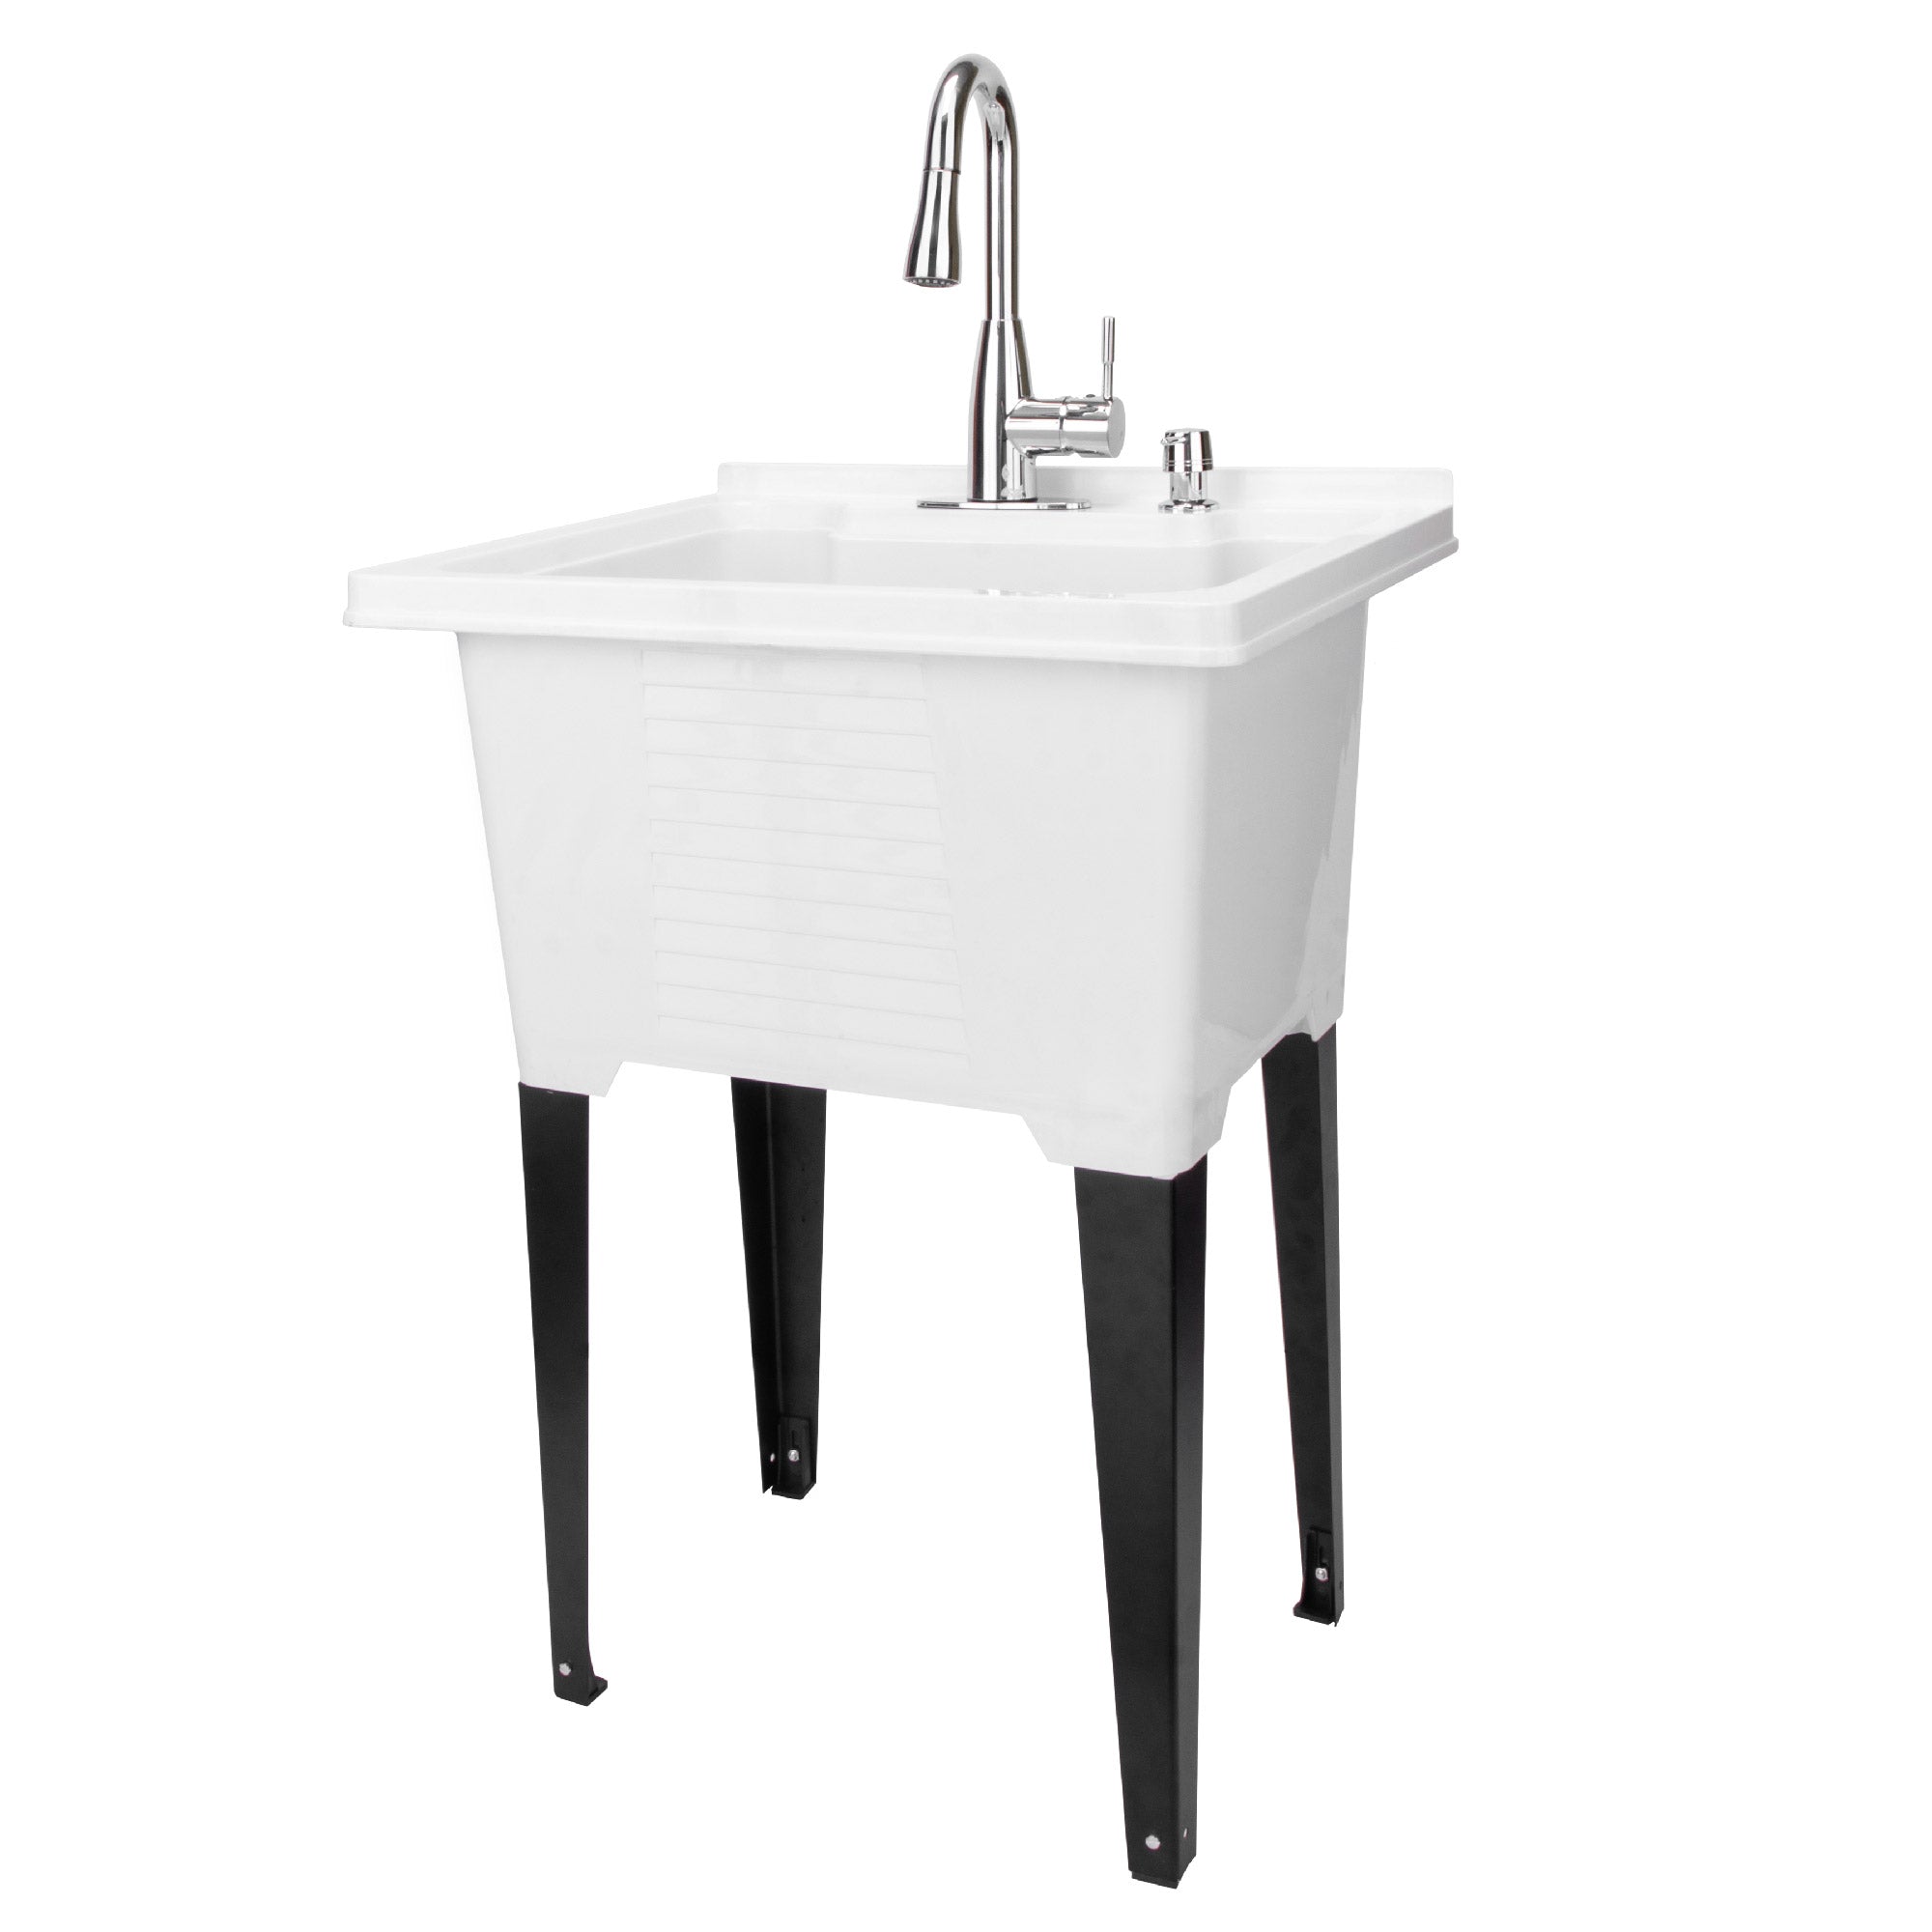 Tehila Luxe Freestanding White Utility Sink with Chrome Finish Low-Profile  Pull-Down Faucet